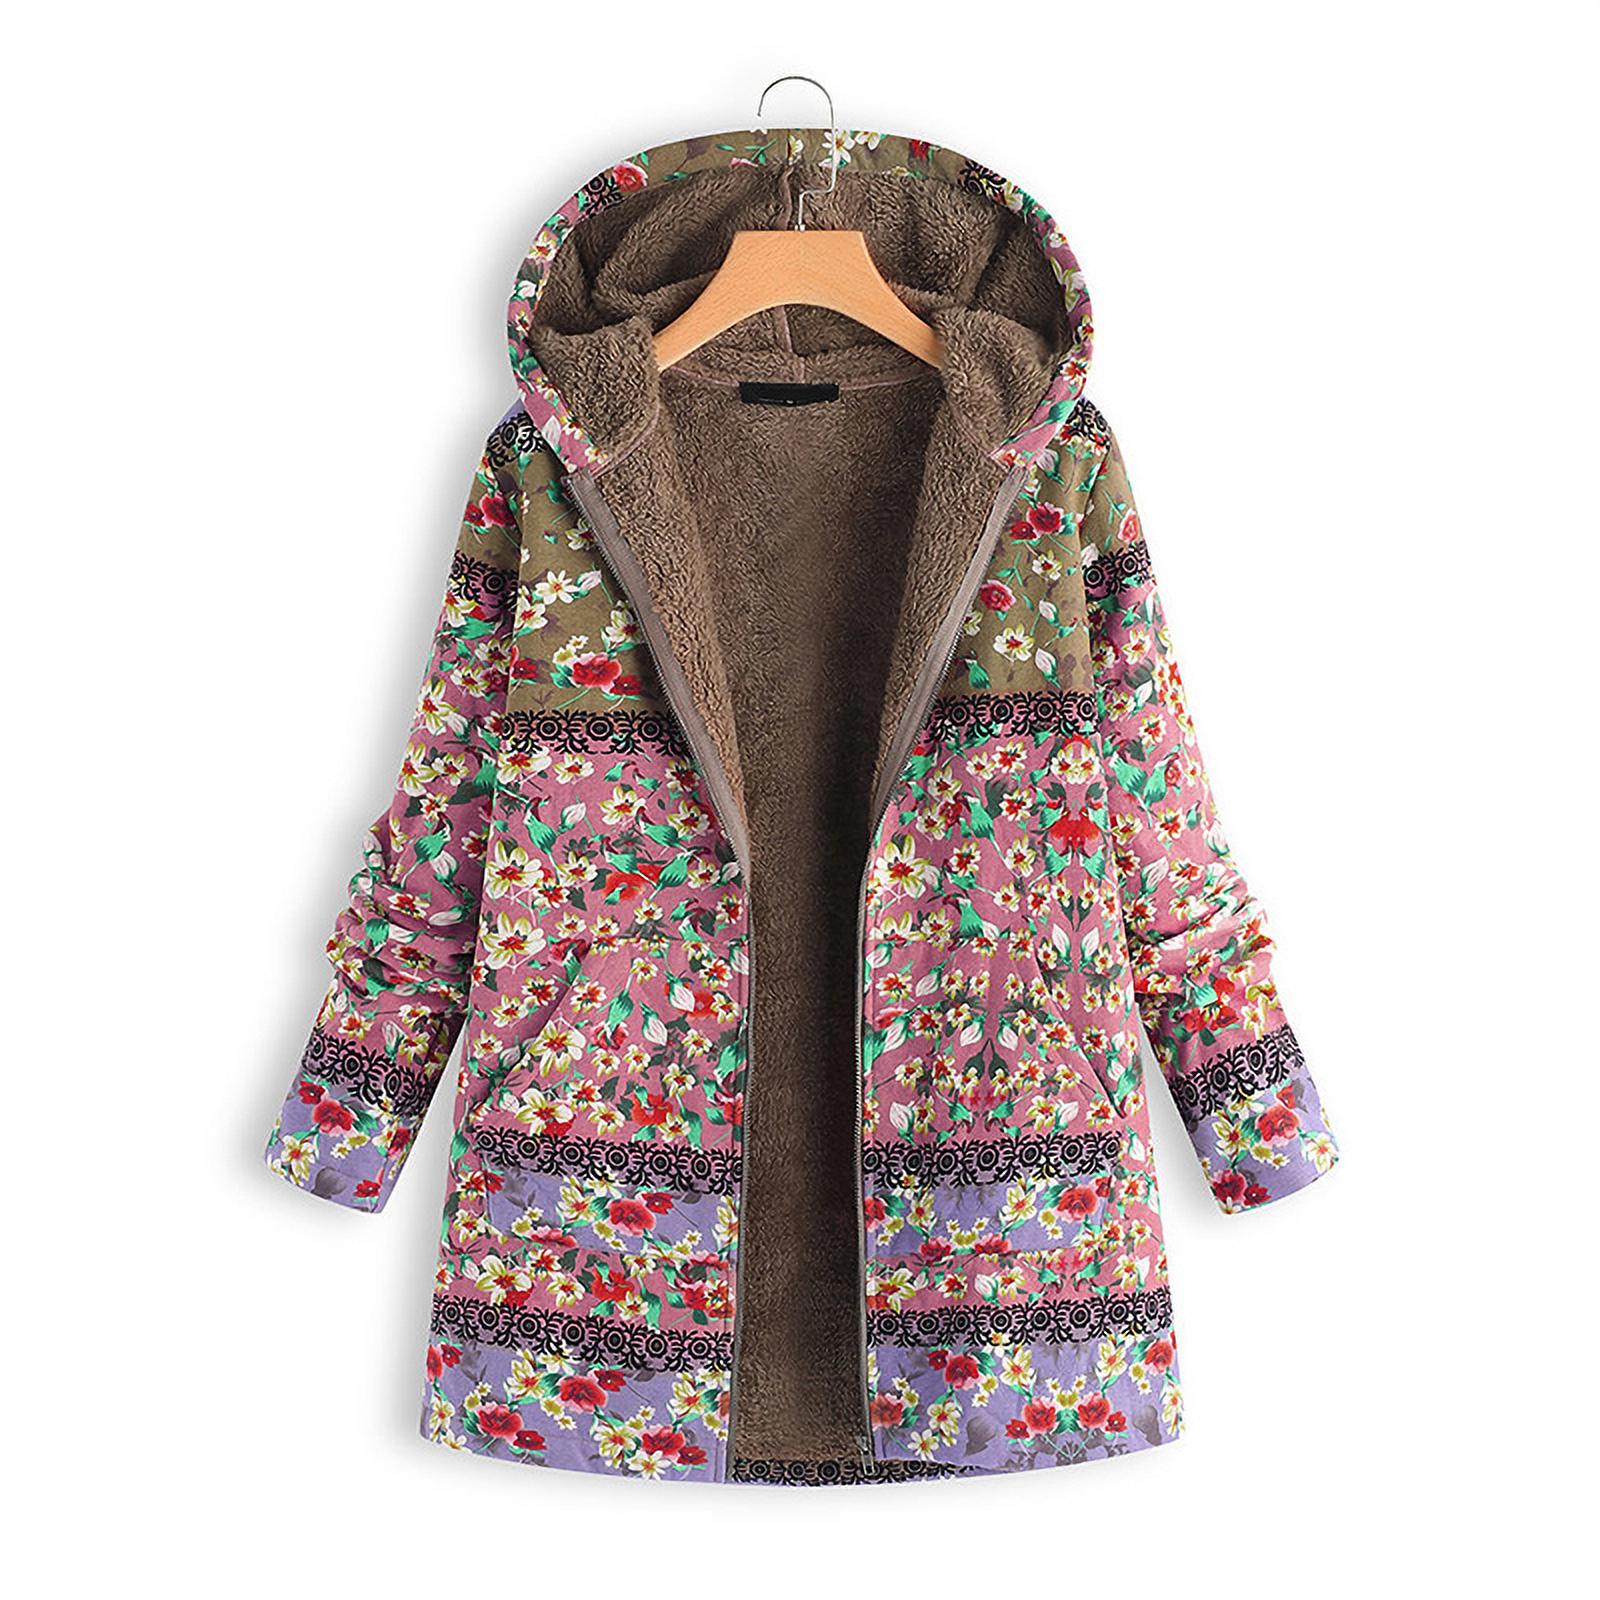 Women Winter Coat Floral Printed Hooded with Pockets Warm Fleece Button Coat Long Sleeve Jacket - image 1 of 8